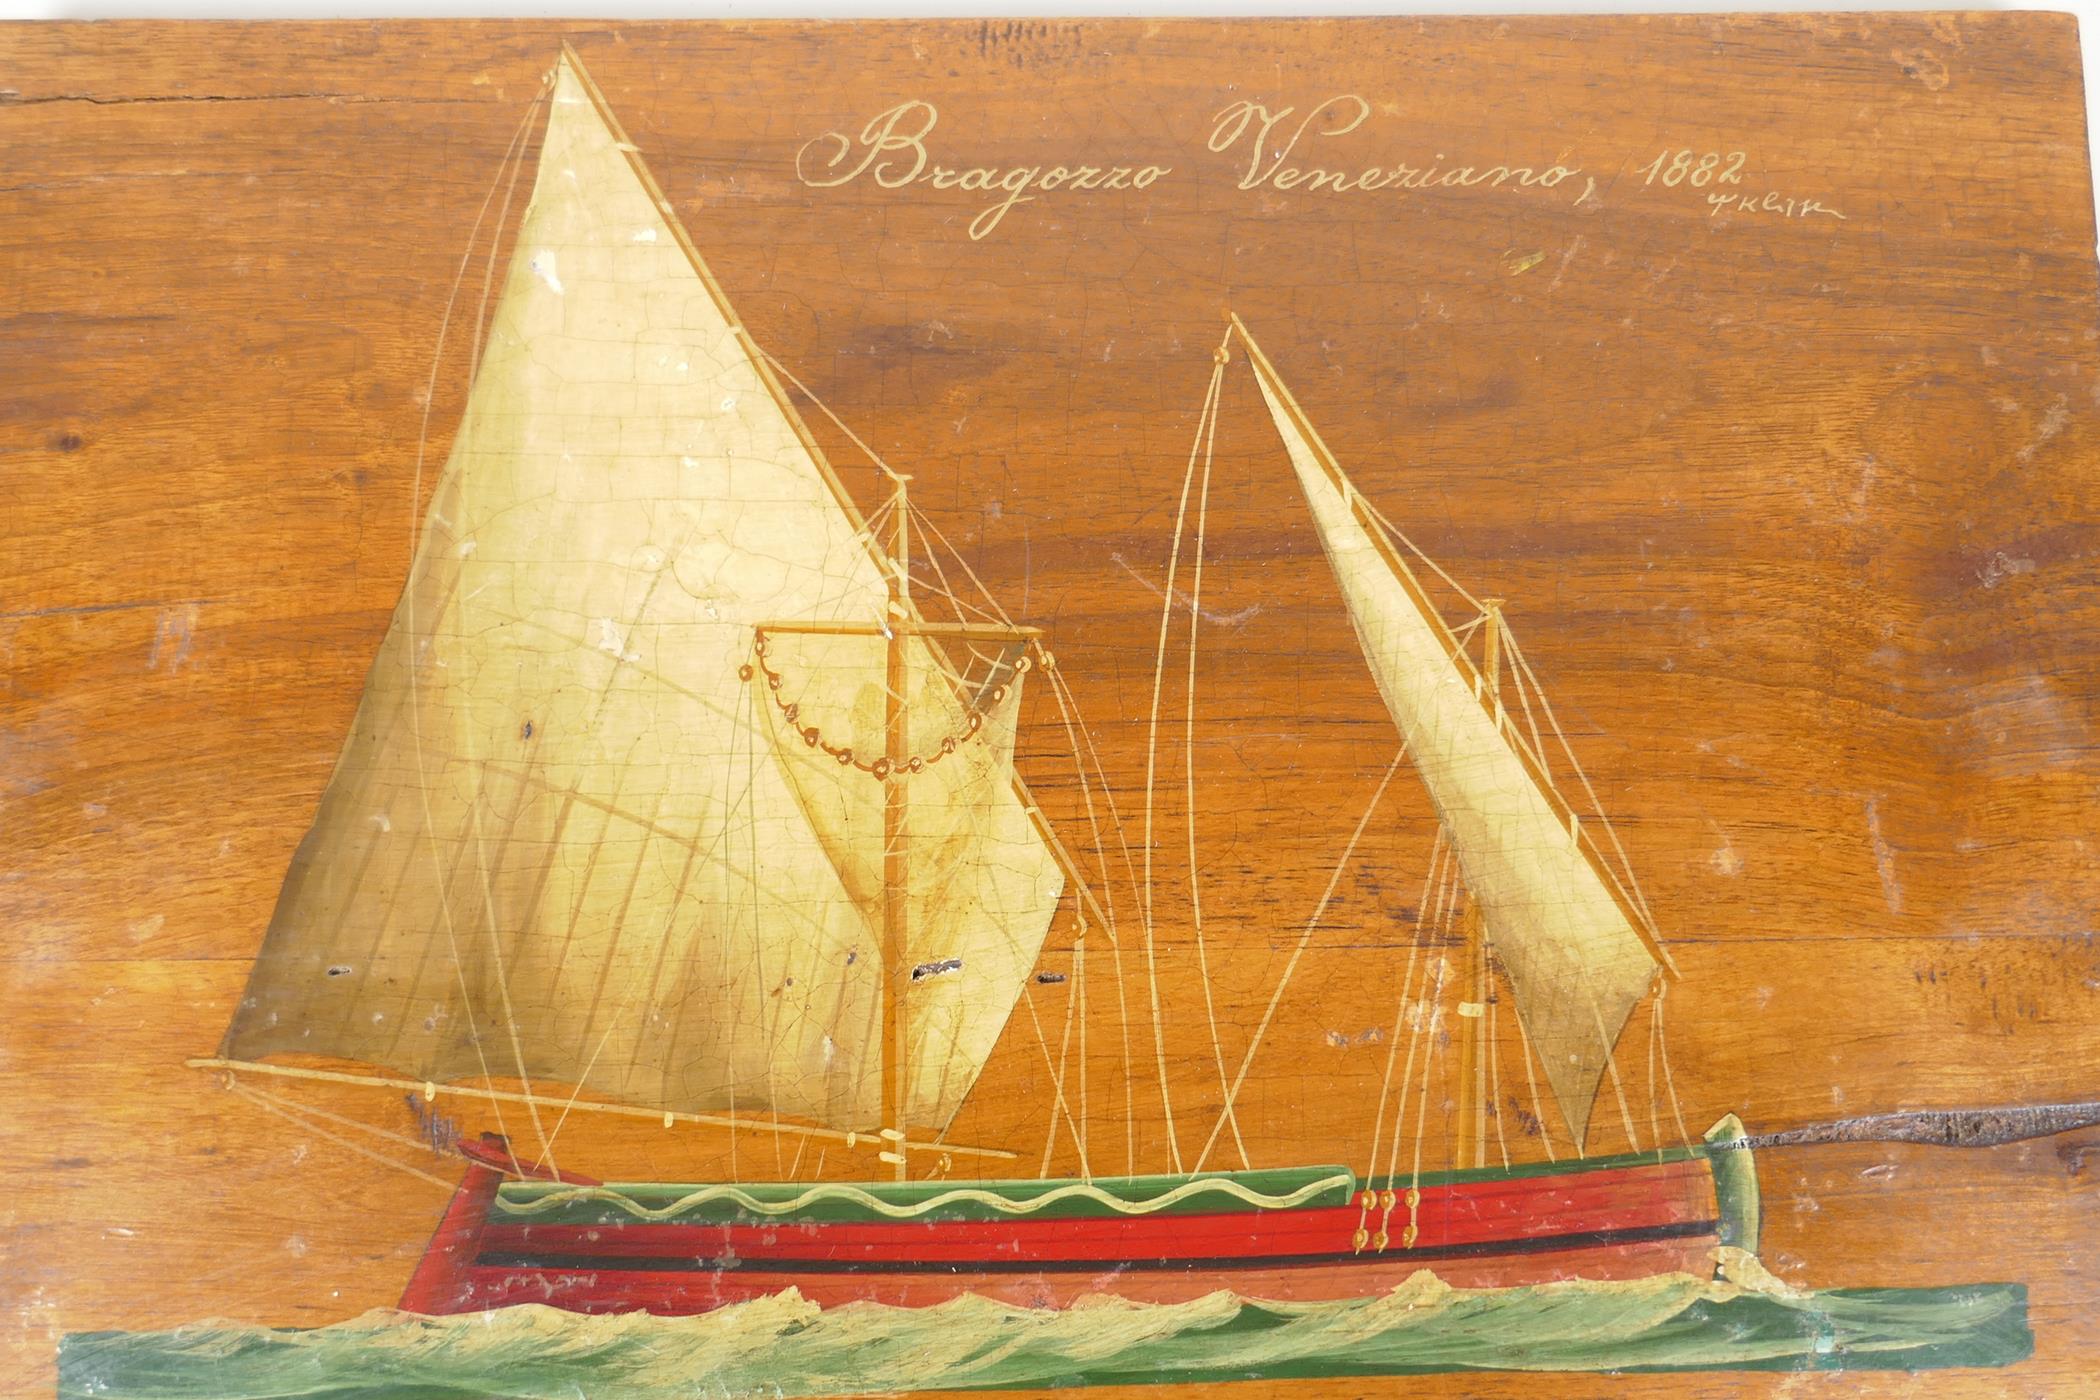 An adriatic sailing boat, 'Bragazzo Venezians, 1882' signed indistinctly, painted on a wood panel, - Image 2 of 4